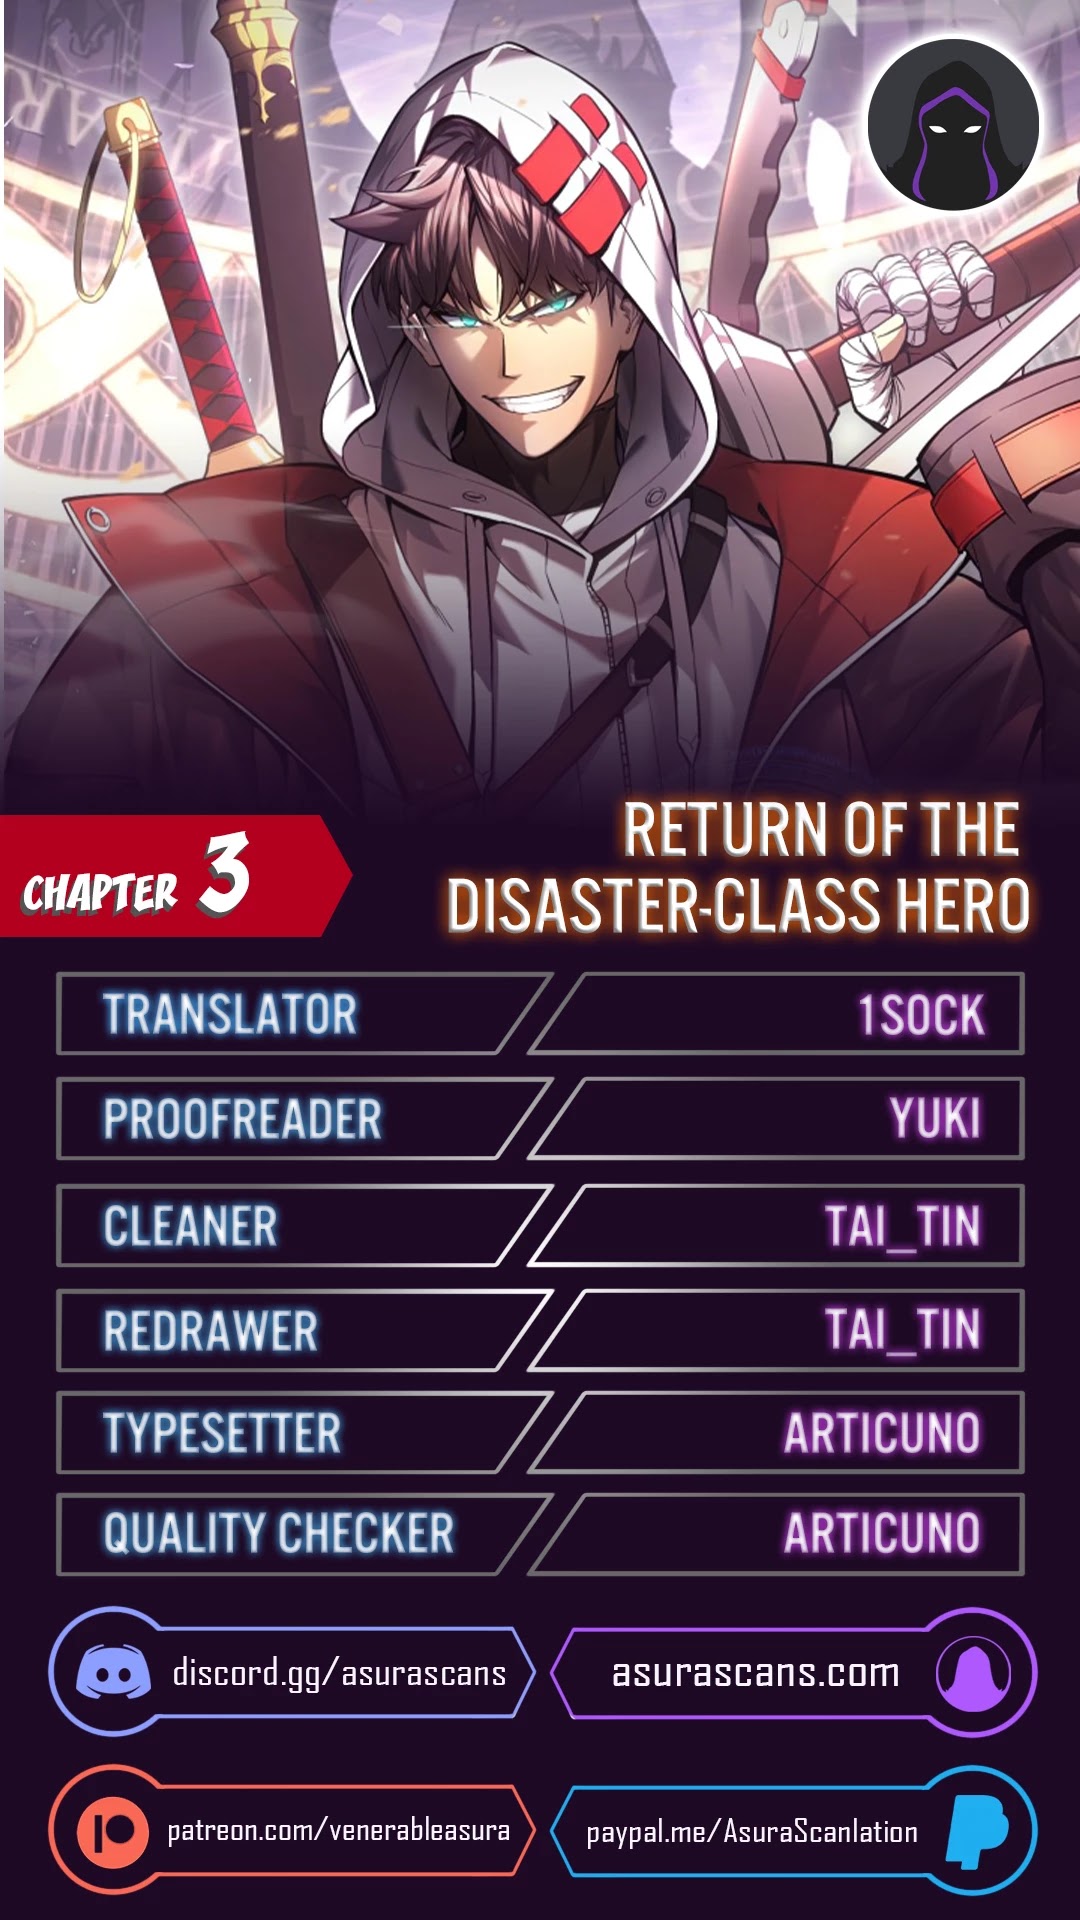 The Return Of The Disaster-Class Hero Chapter 3